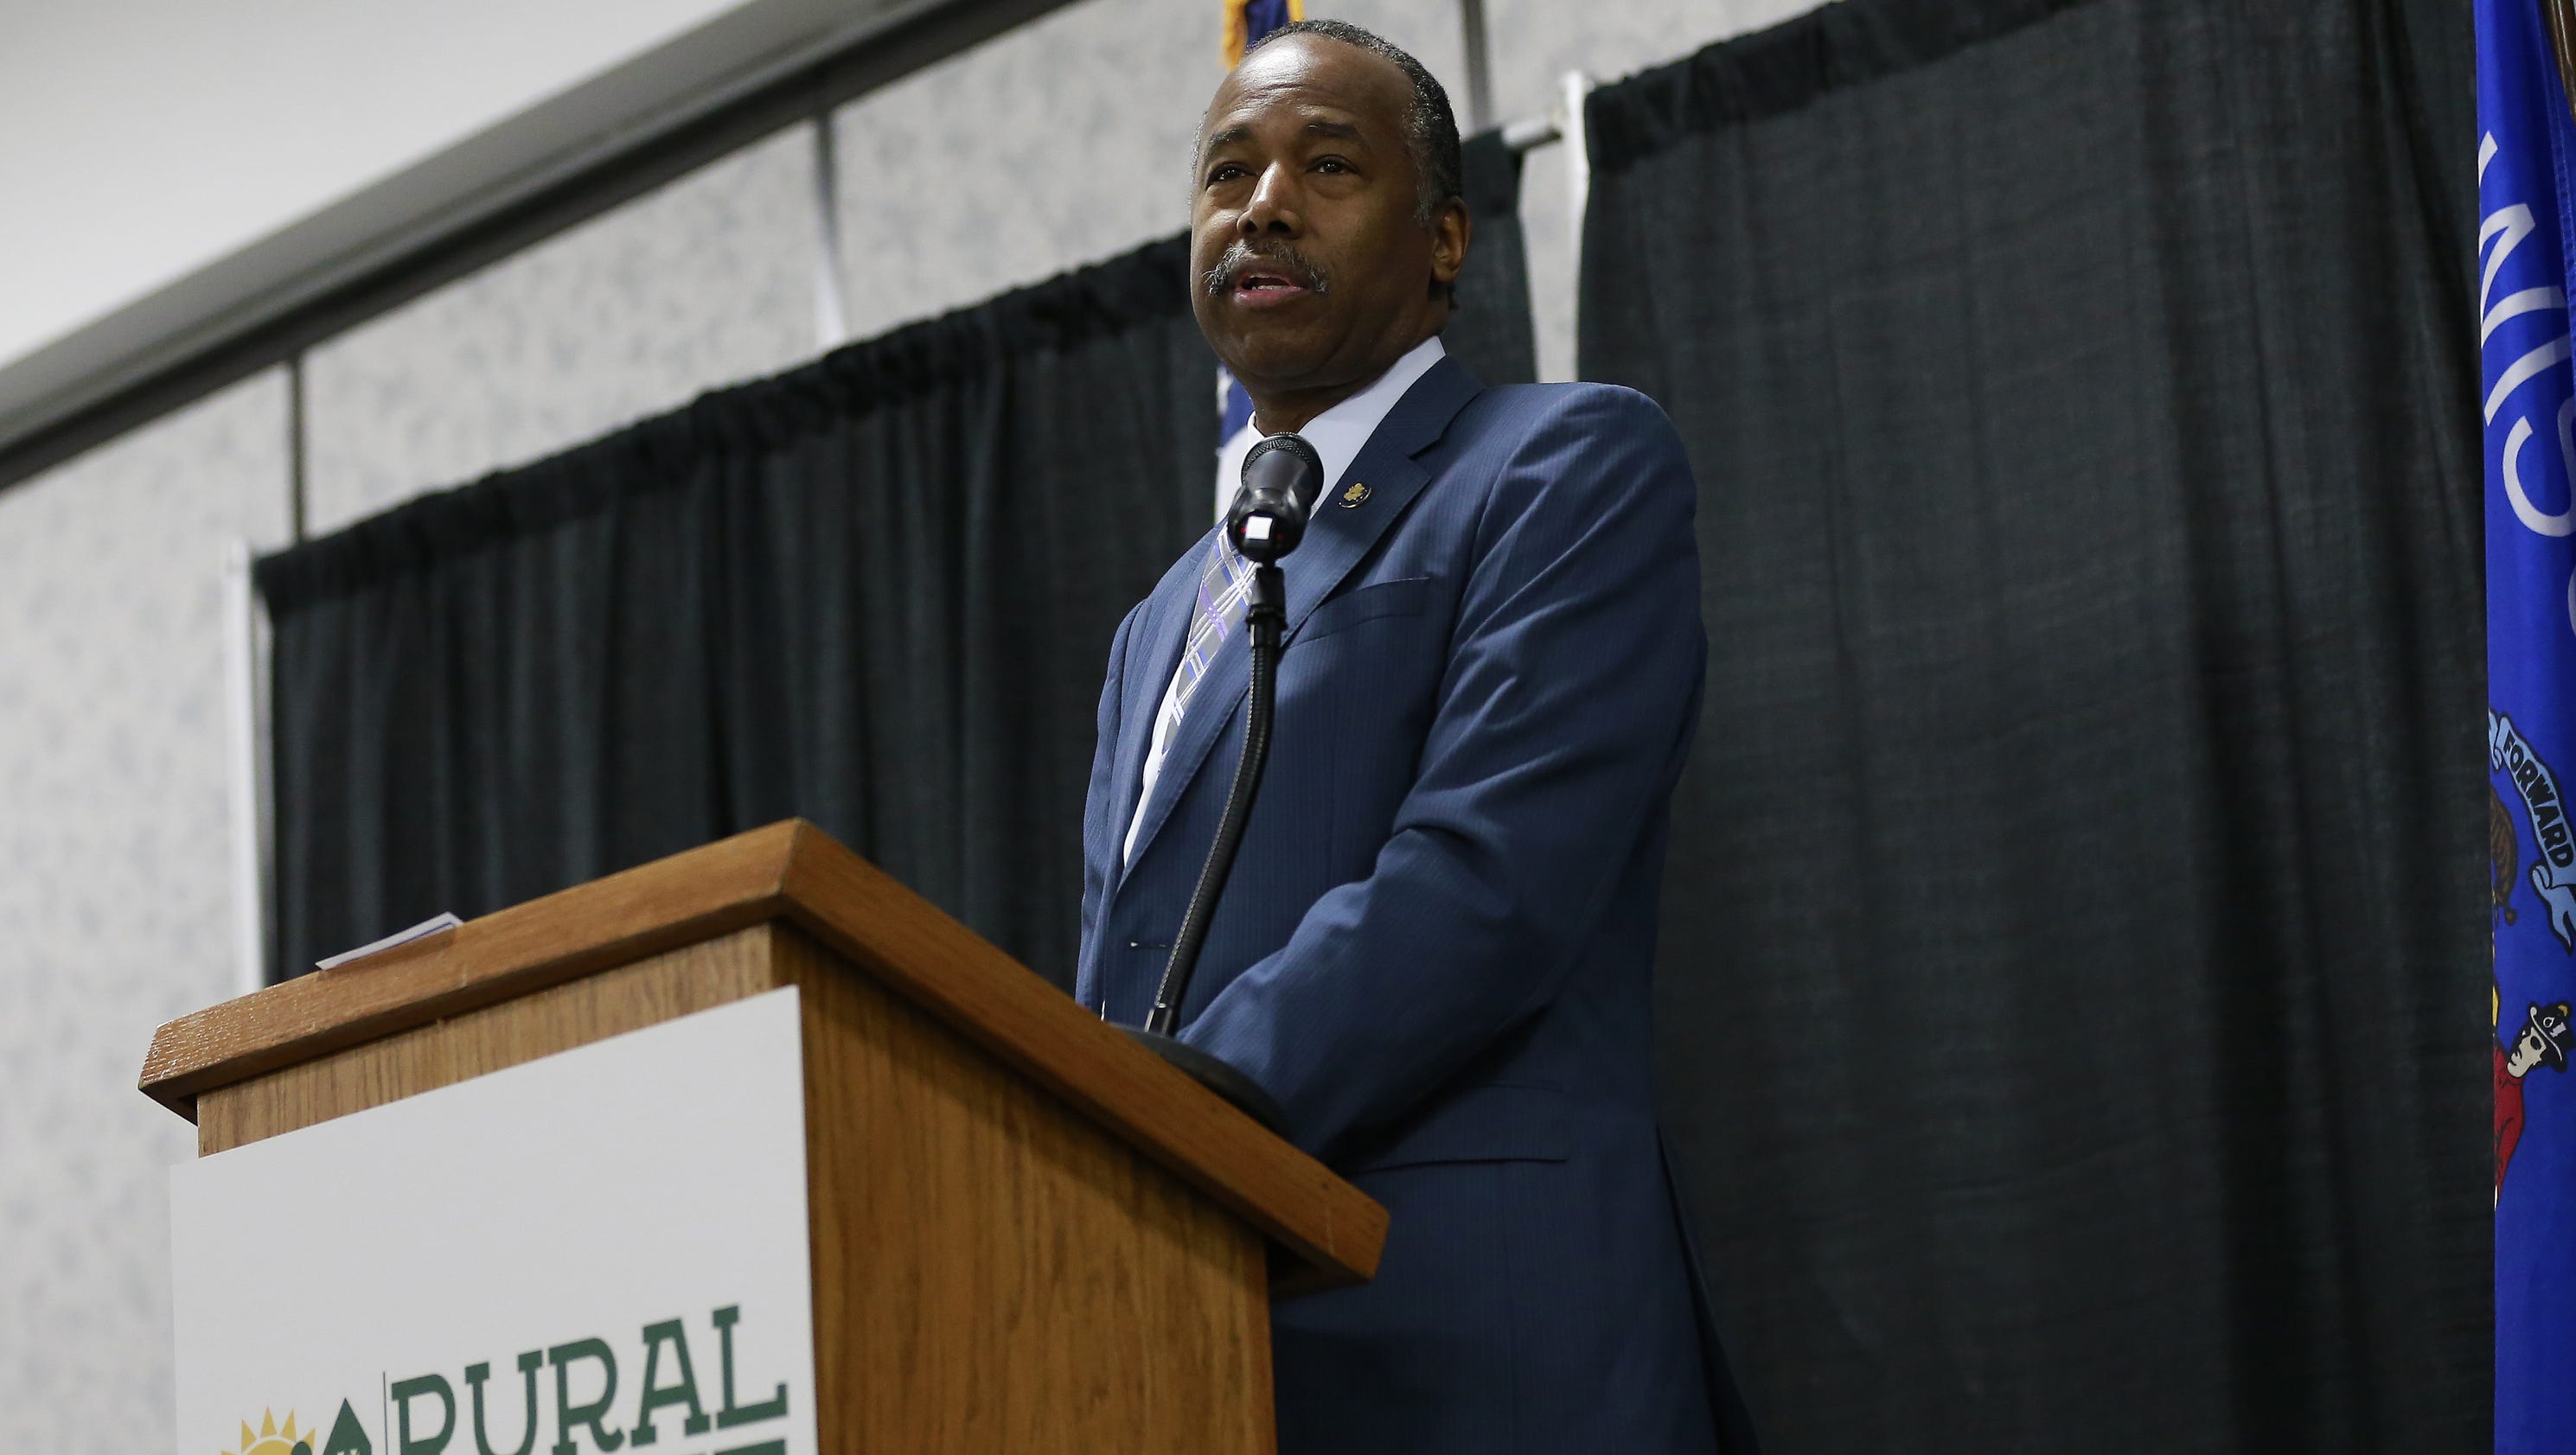 Ben Carson says battling drug addiction will help reduce homelessness in Wisconsin, nation